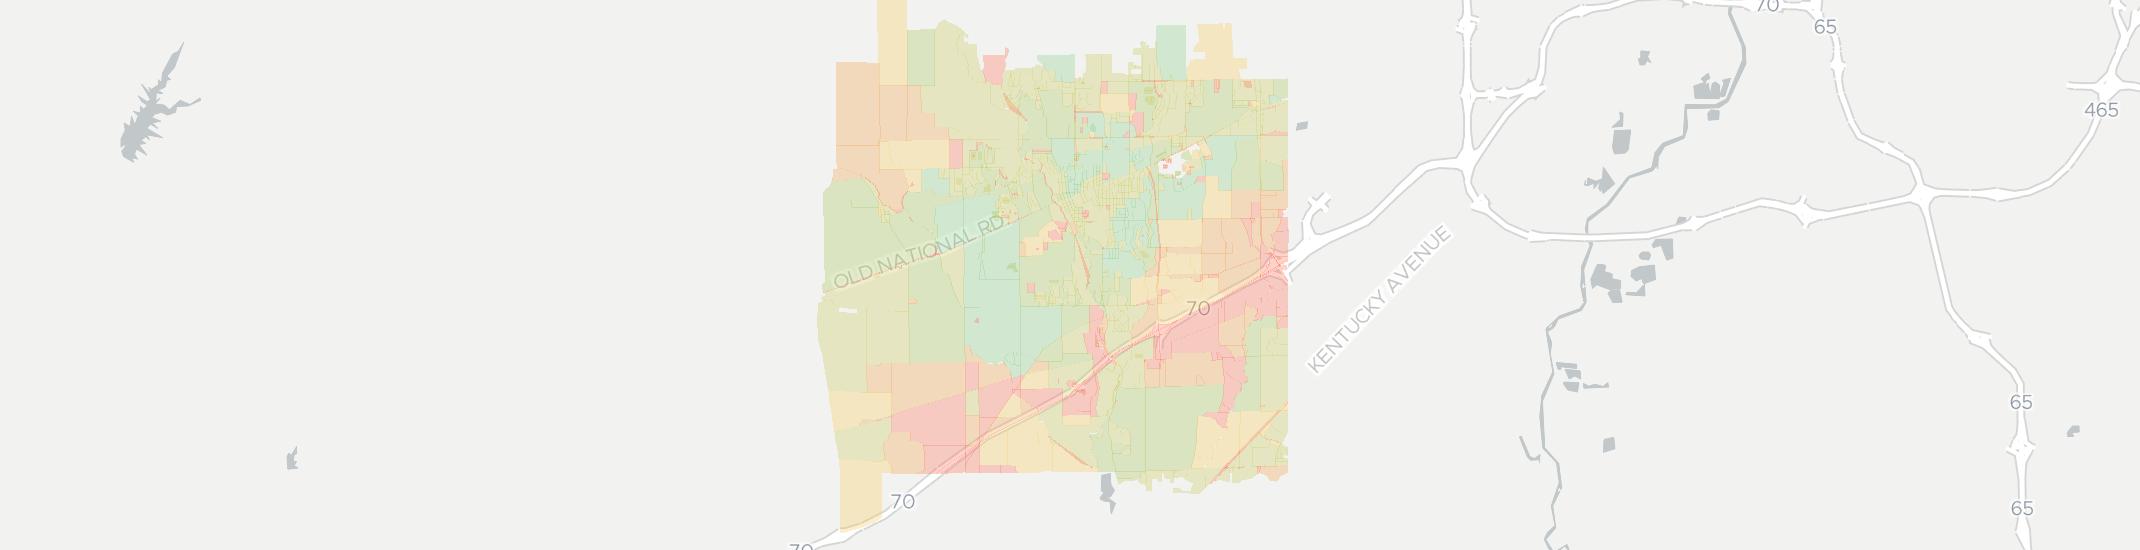 Plainfield Internet Competition Map. Click for interactive map.